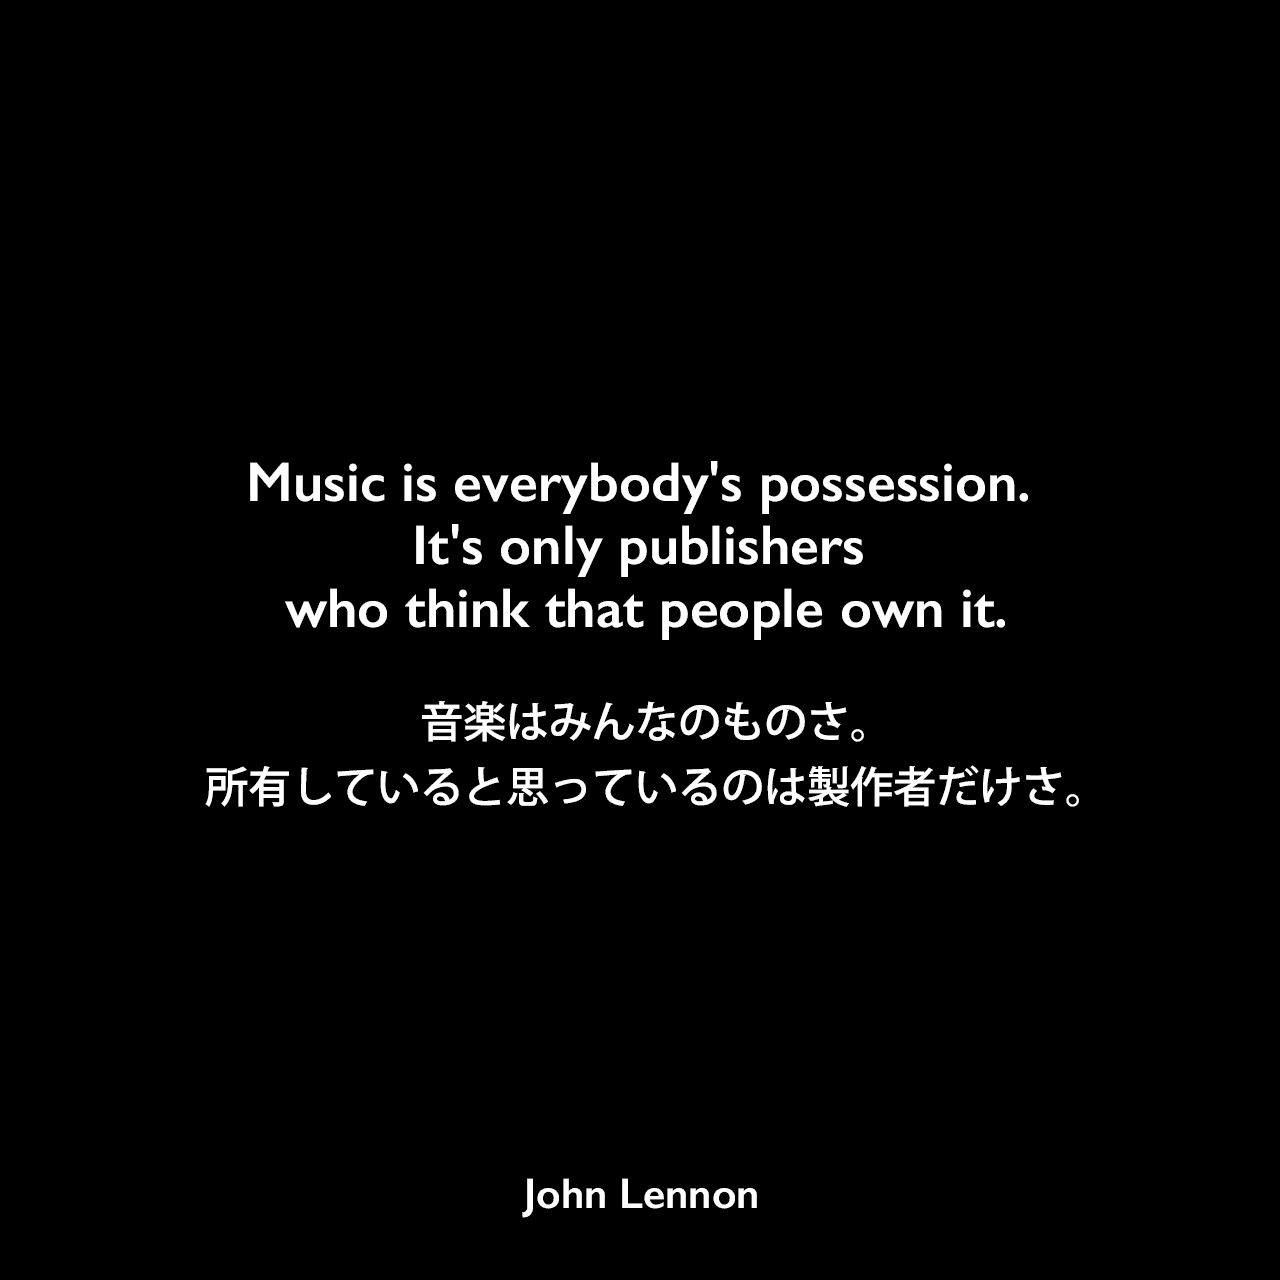 Music is everybody's possession. It's only publishers who think that people own it.音楽はみんなのものさ。所有していると思っているのは製作者だけさ。John Lennon